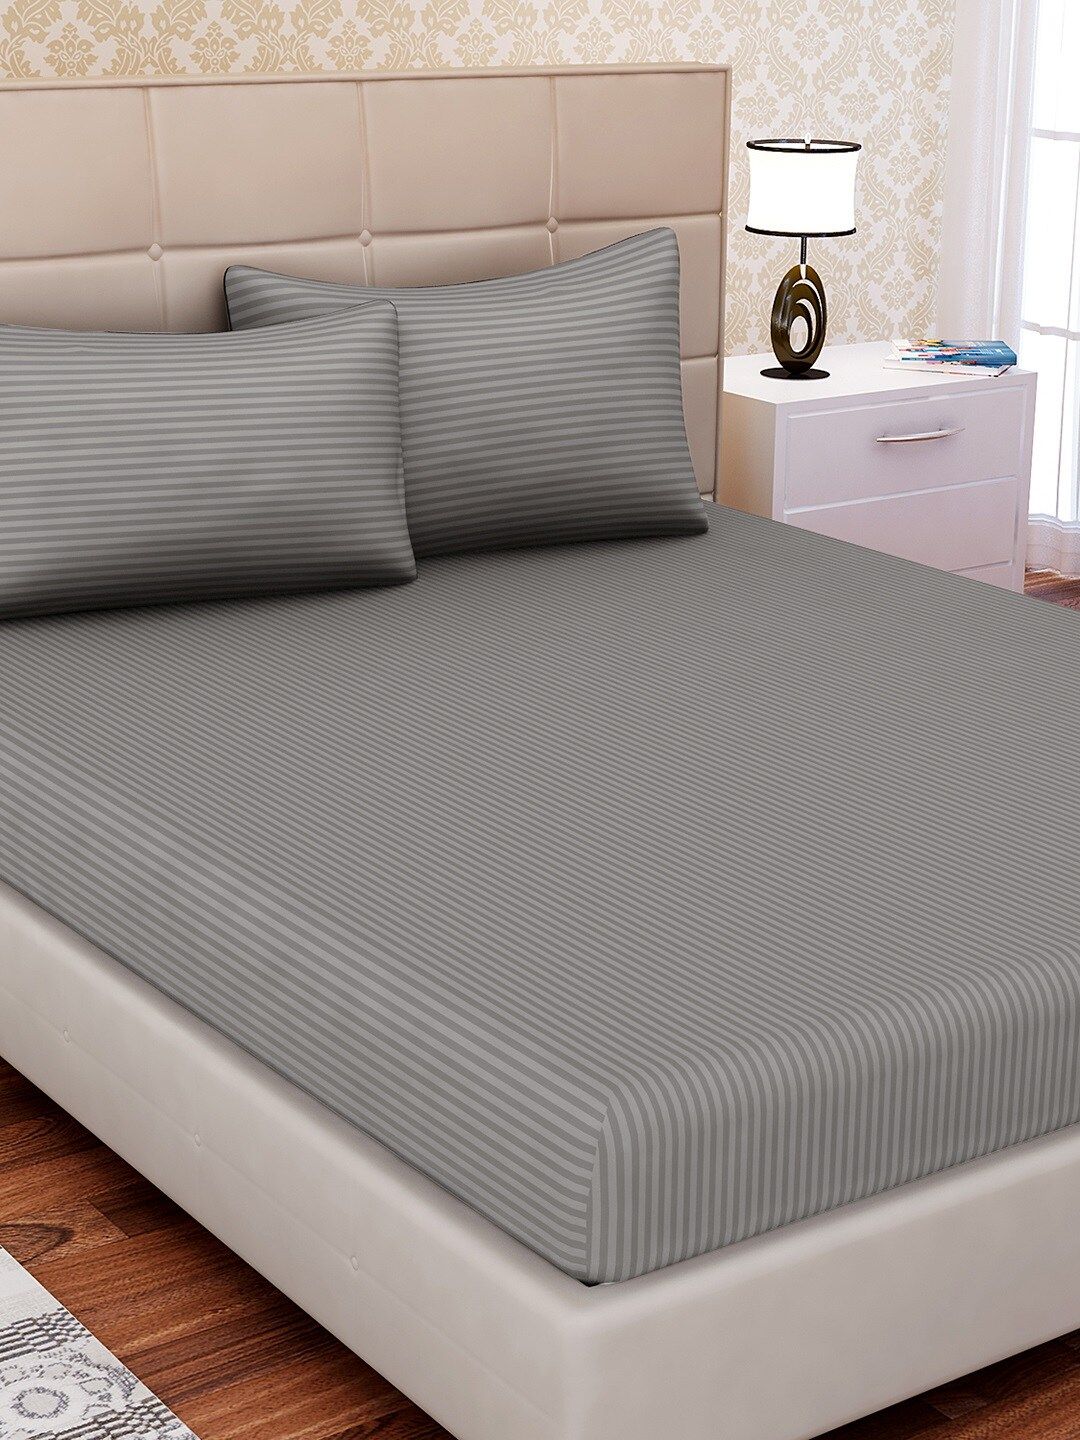 SEJ by Nisha Gupta Grey Striped Flat 210 TC Cotton 1 Double Bedsheet with 2 Pillow Covers Price in India